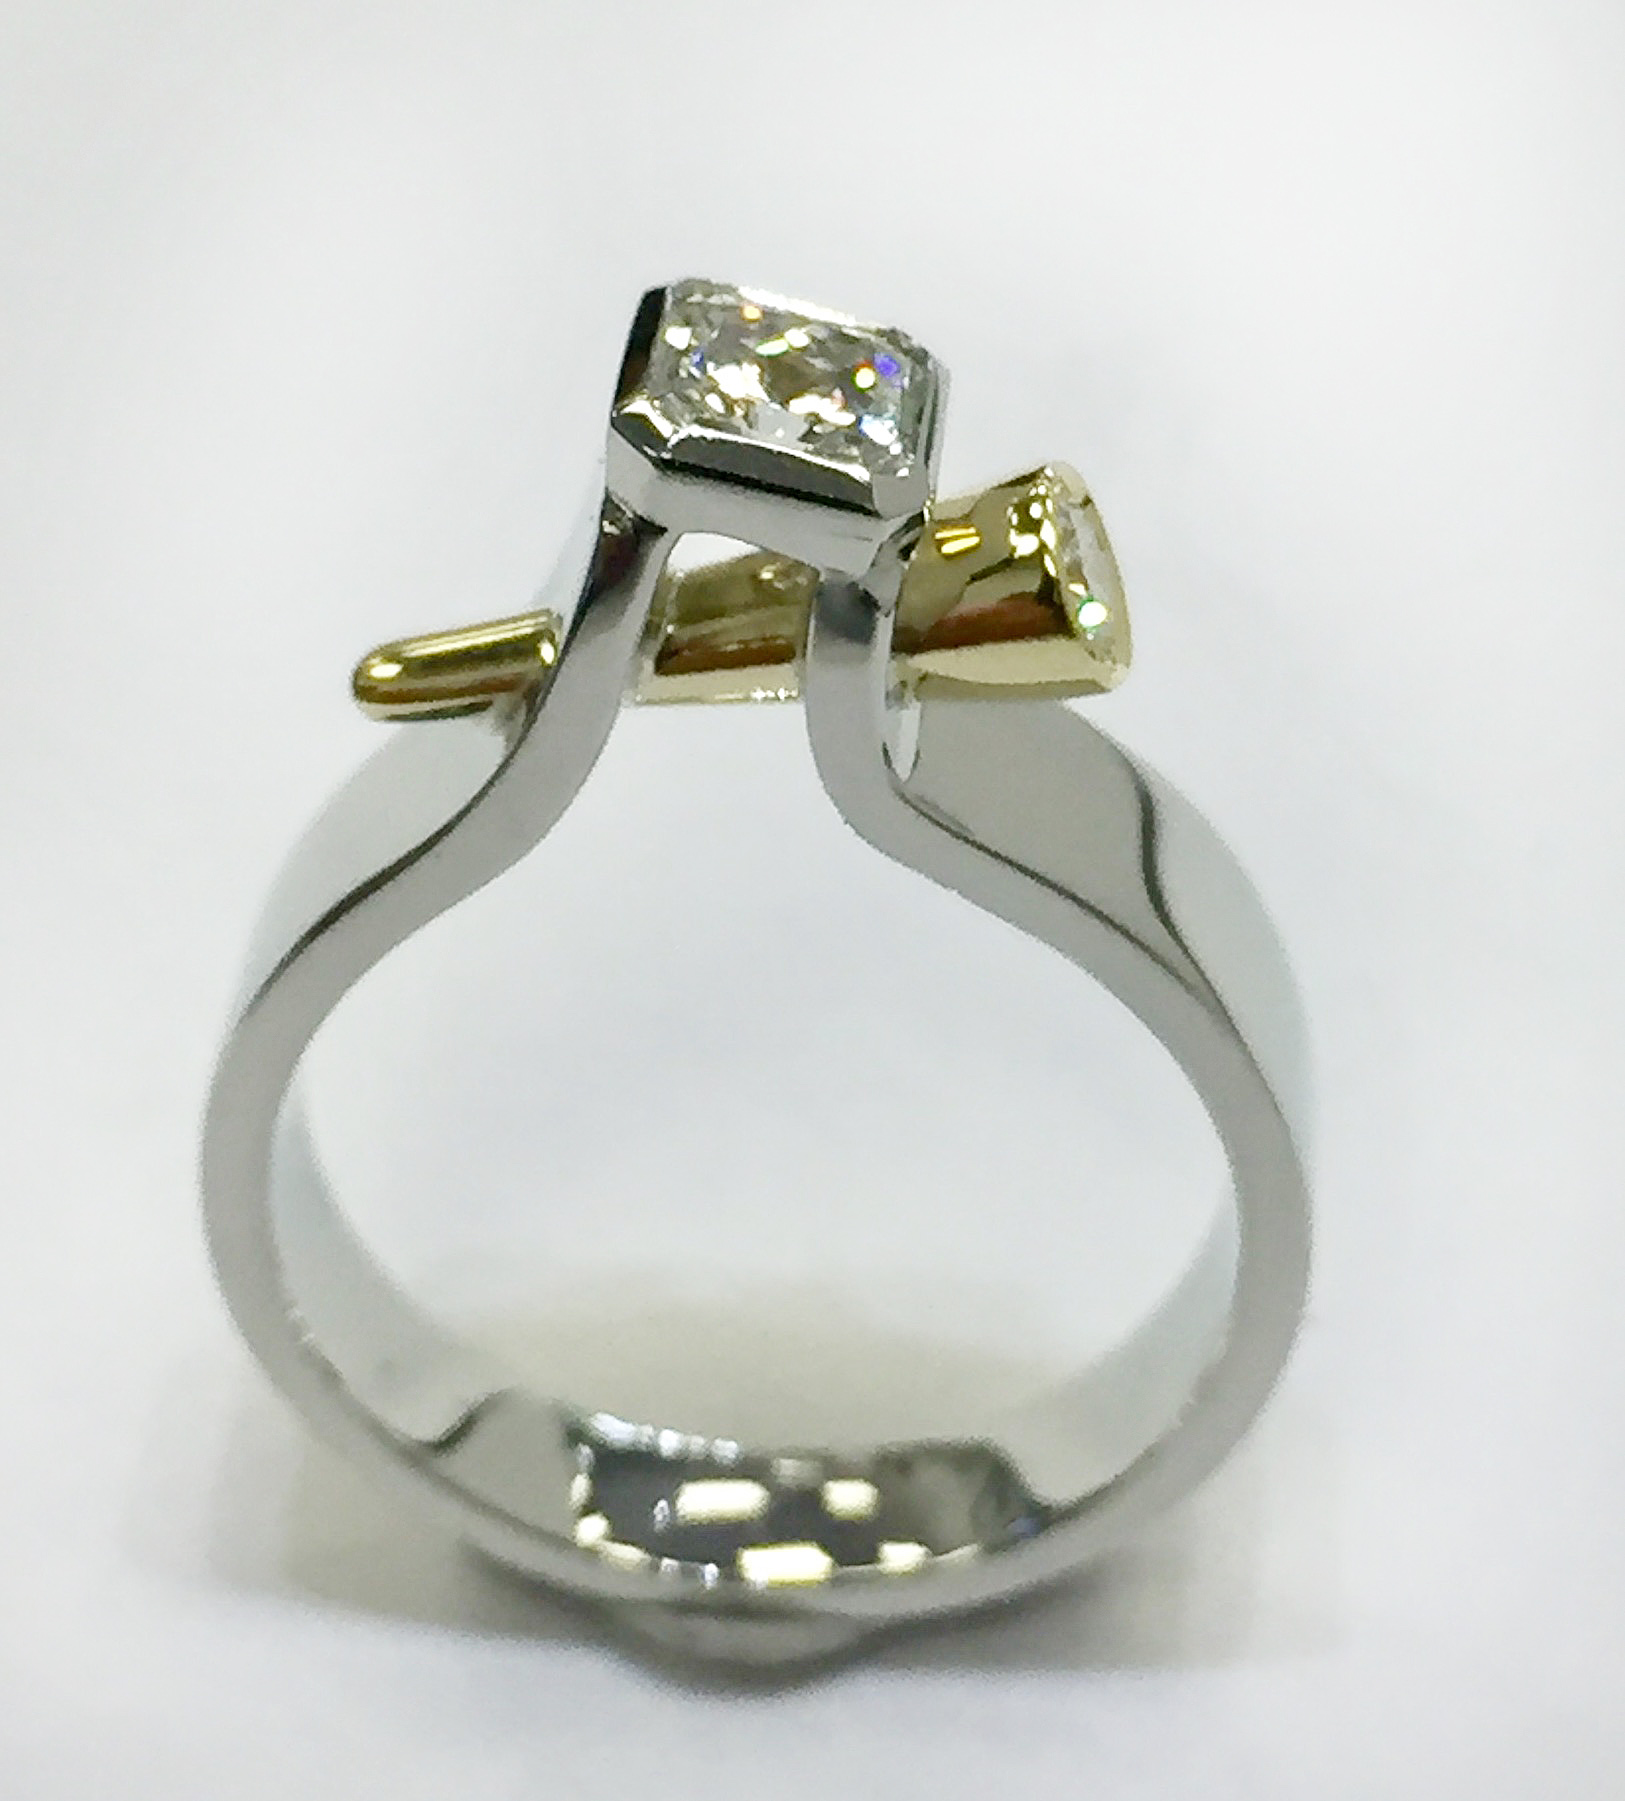 "Torch" ring